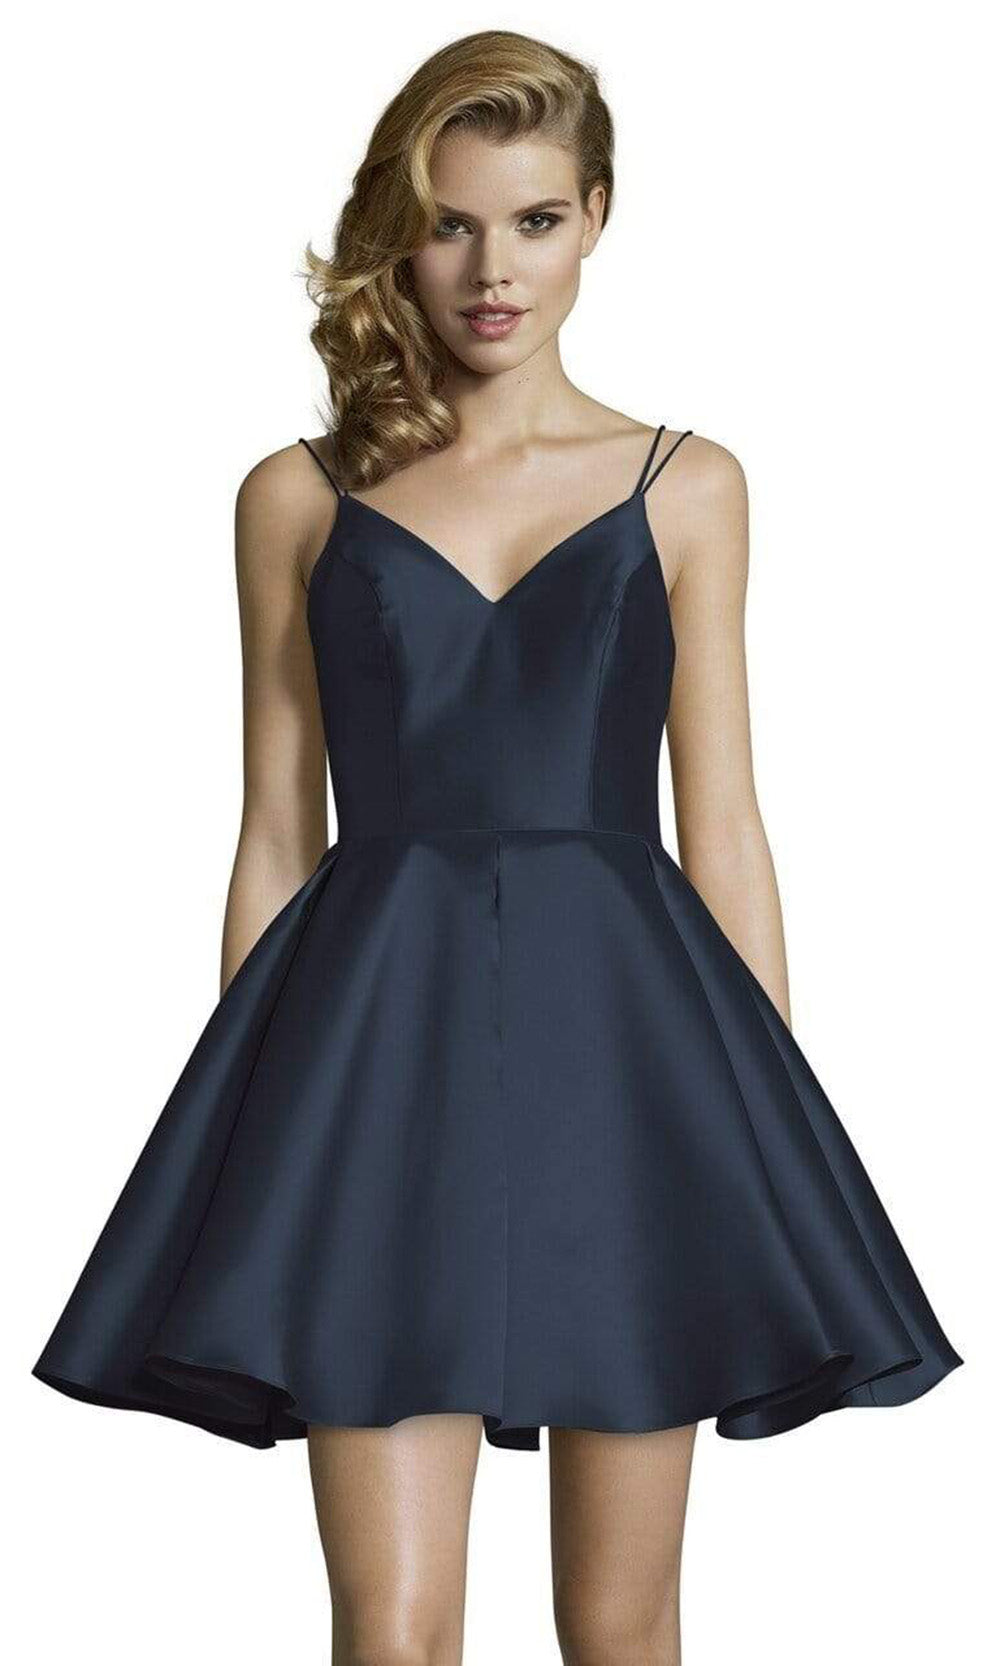 Alyce Paris - 3764 Sleeveless V Neck Double Strapped Fit and Flare Cocktail Dress - 1 pc Midnight in size 00 Available CCSALE 00 / Midnight